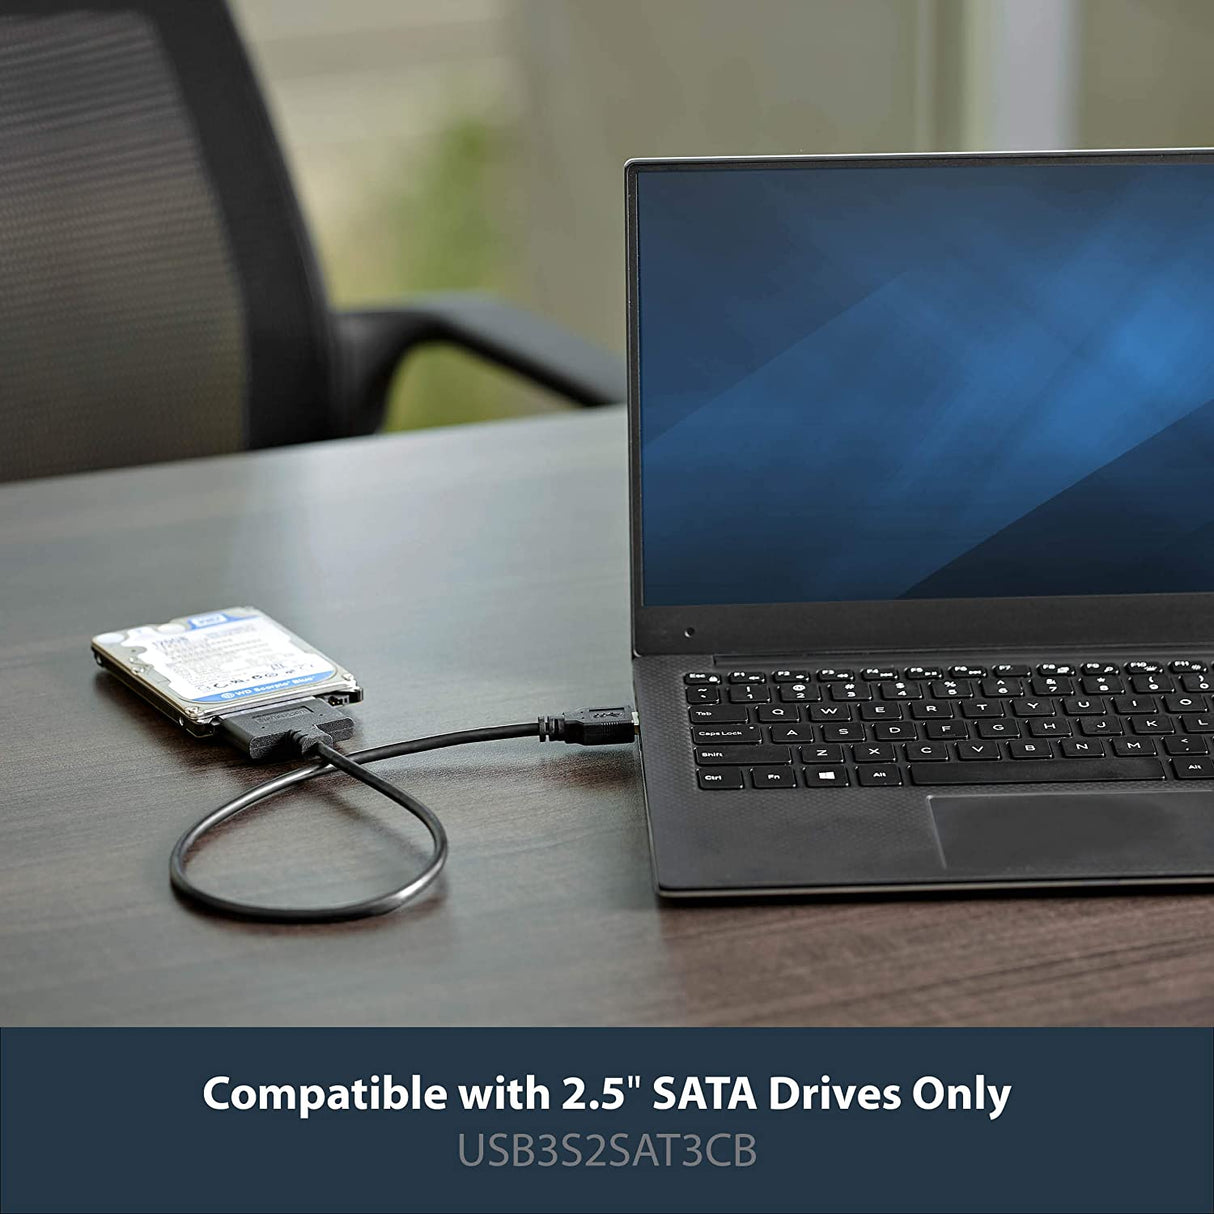 StarTech.com SATA to USB Cable - USB 3.0 to 2.5” SATA III Hard Drive Adapter - External Converter for SSD/HDD Data Transfer (USB3S2SAT3CB) USB 3.0 | 2.5" Cable